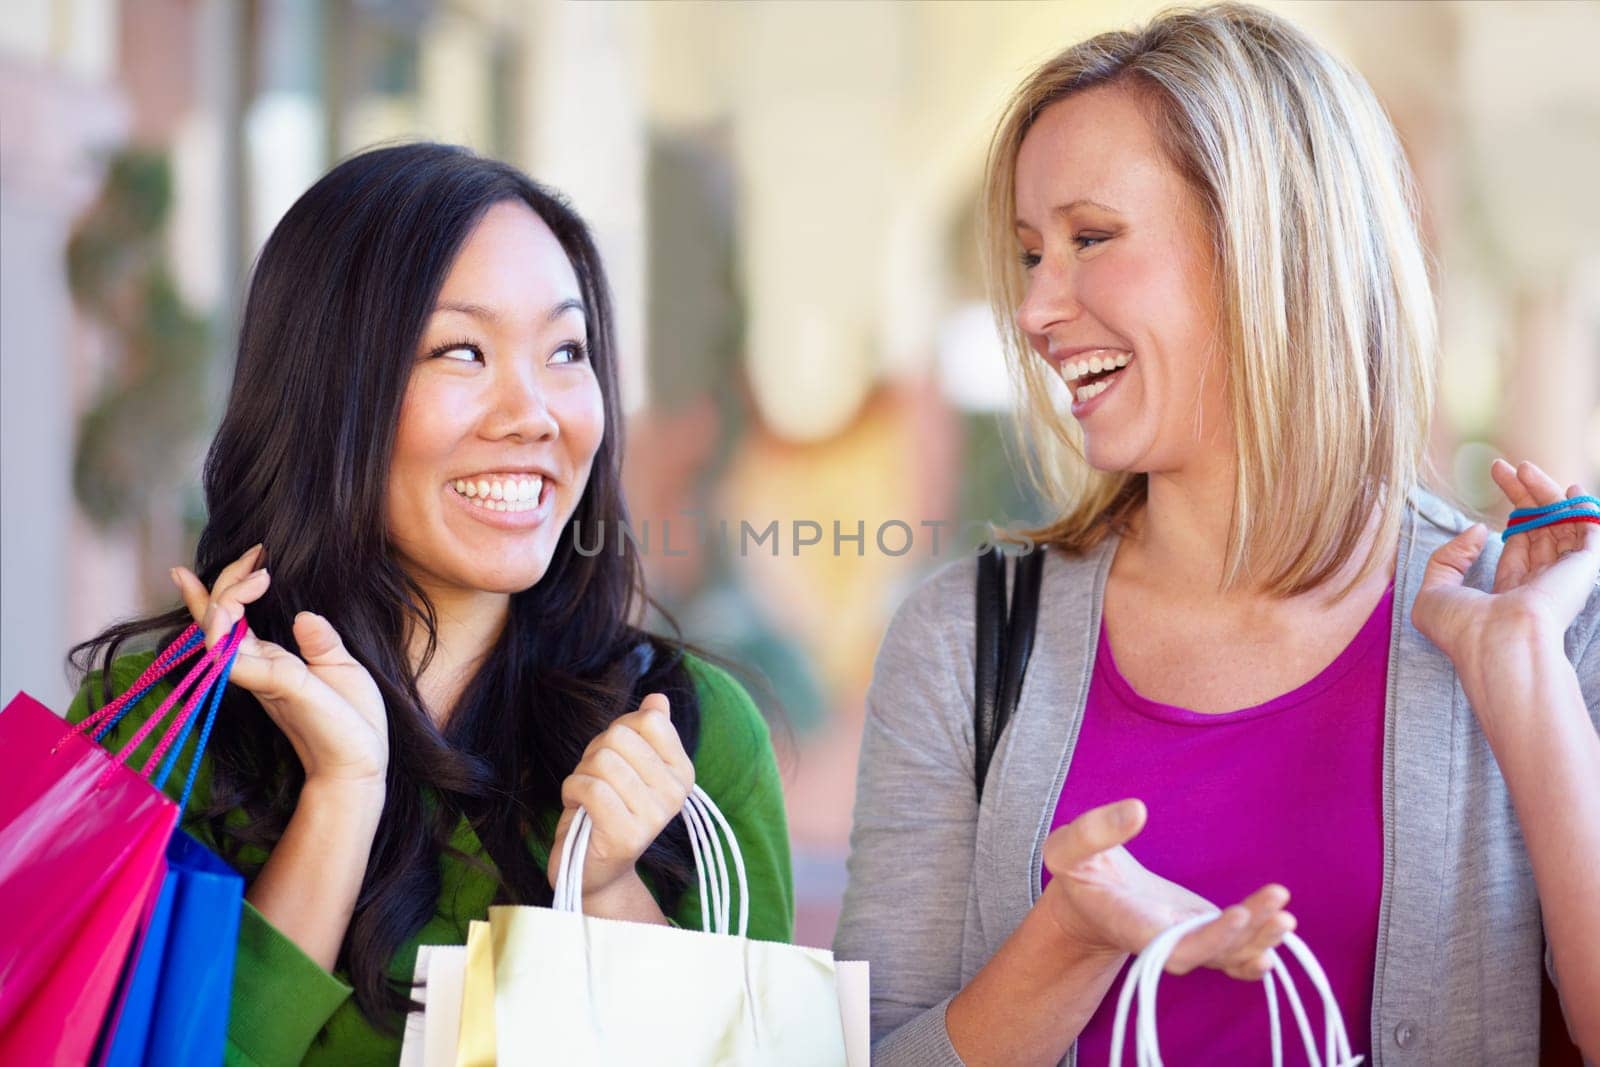 Happy, sale and women with bags from shopping in the city or mall and excited about a deal. Smile, conversation and diversity with female friends talking while at a shop for clothes and fashion.